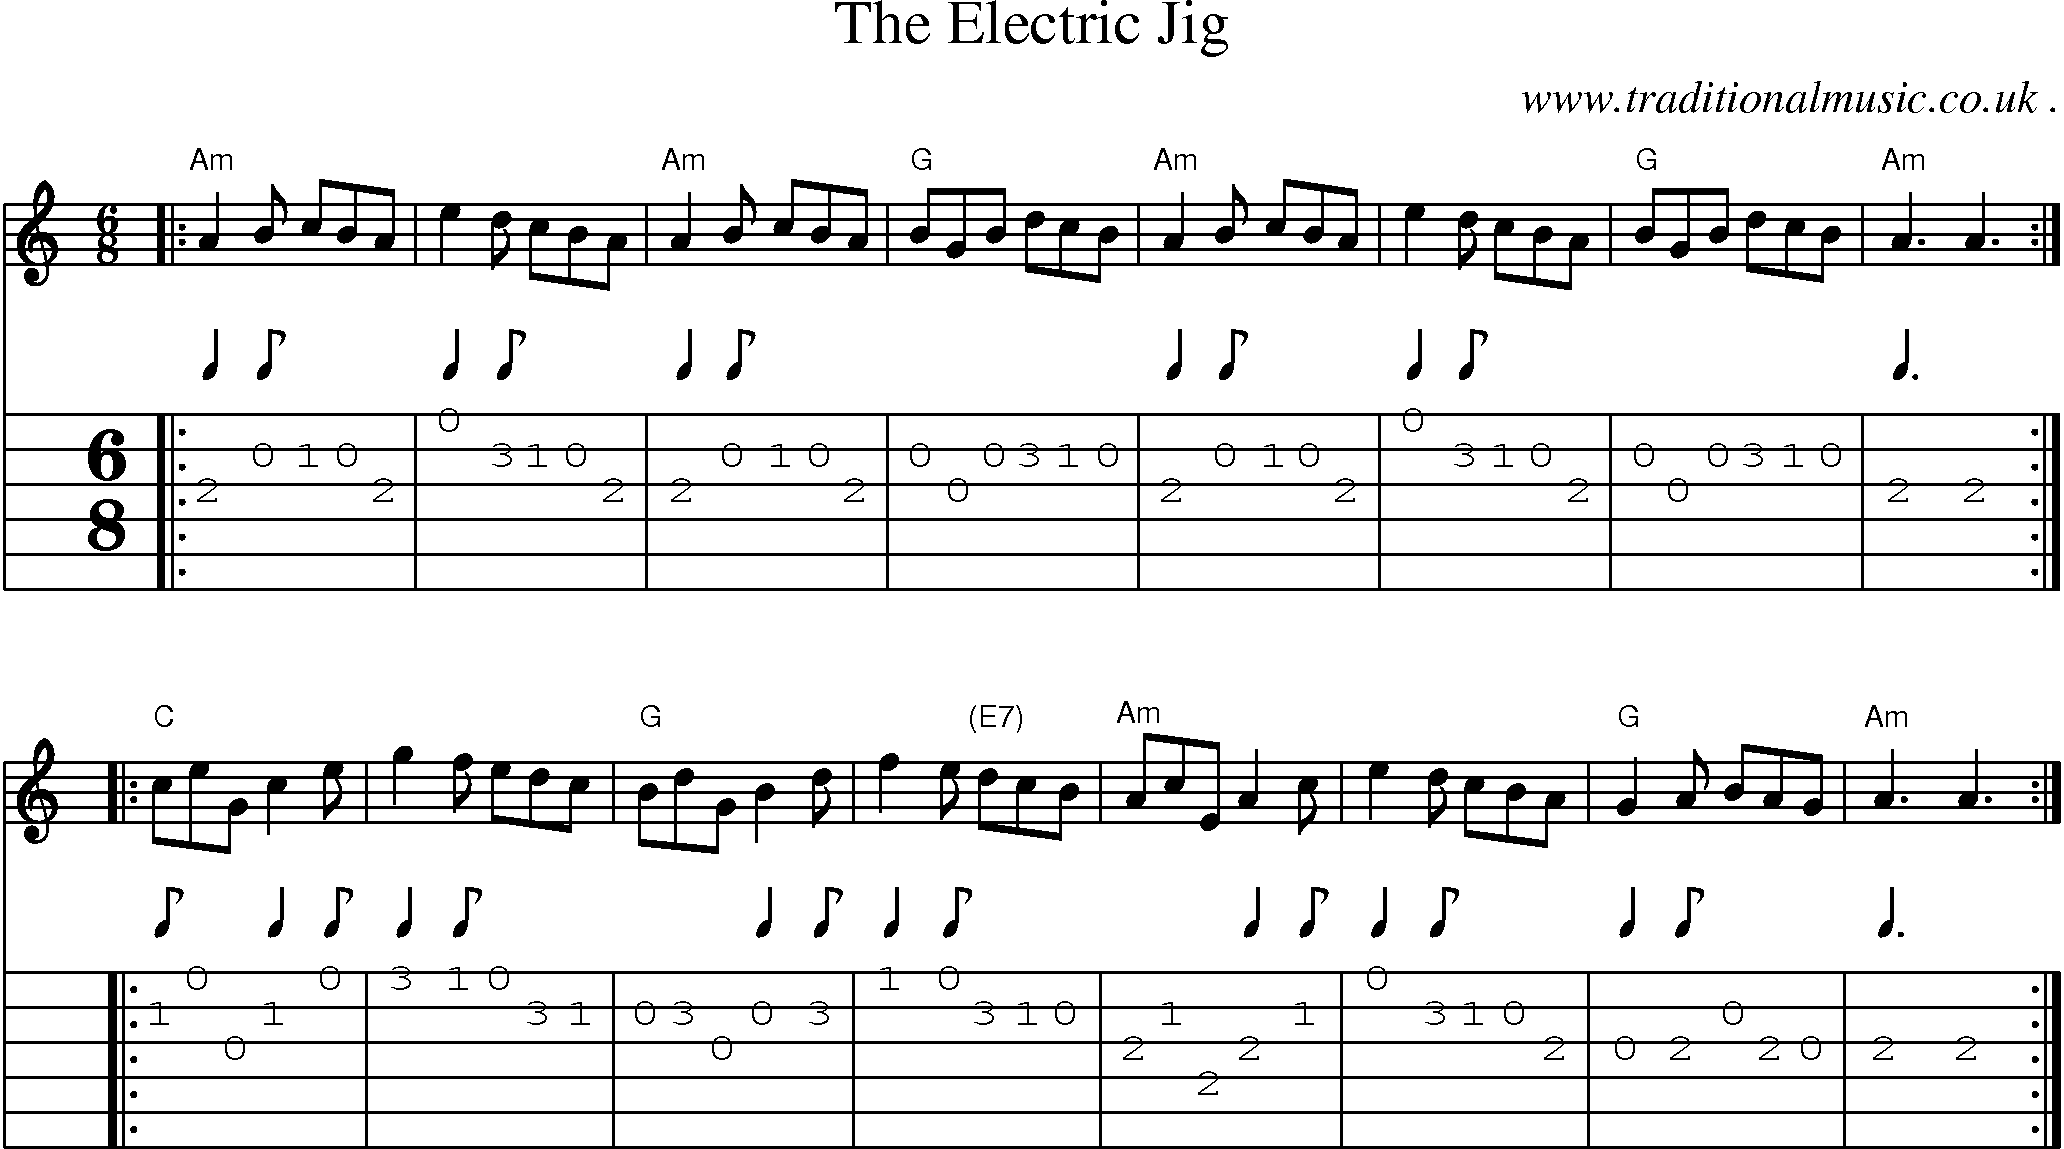 Sheet-music  score, Chords and Guitar Tabs for The Electric Jig